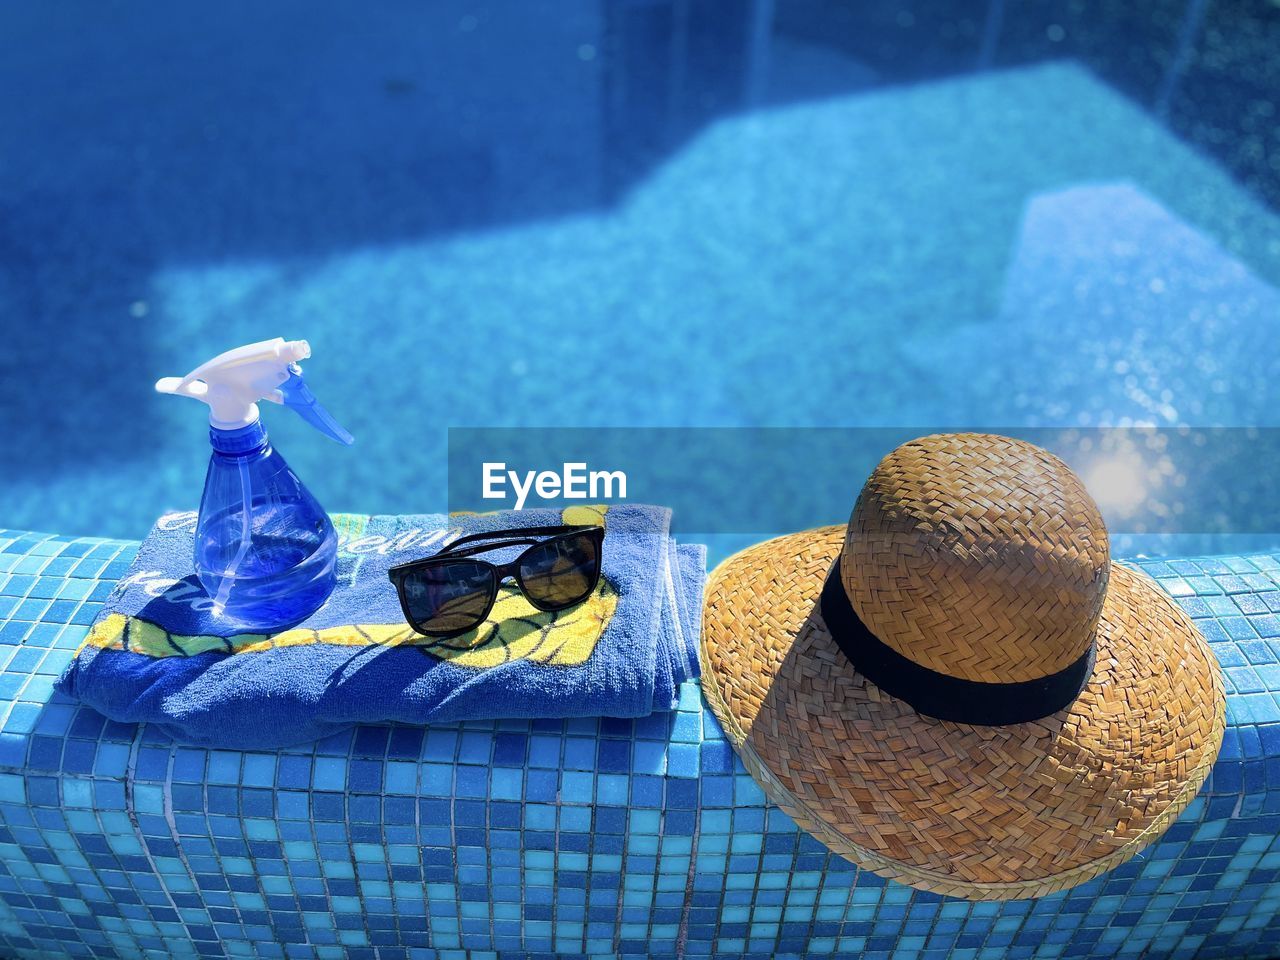 Straw hat, sunglasses, towel and bottle on the pool edge